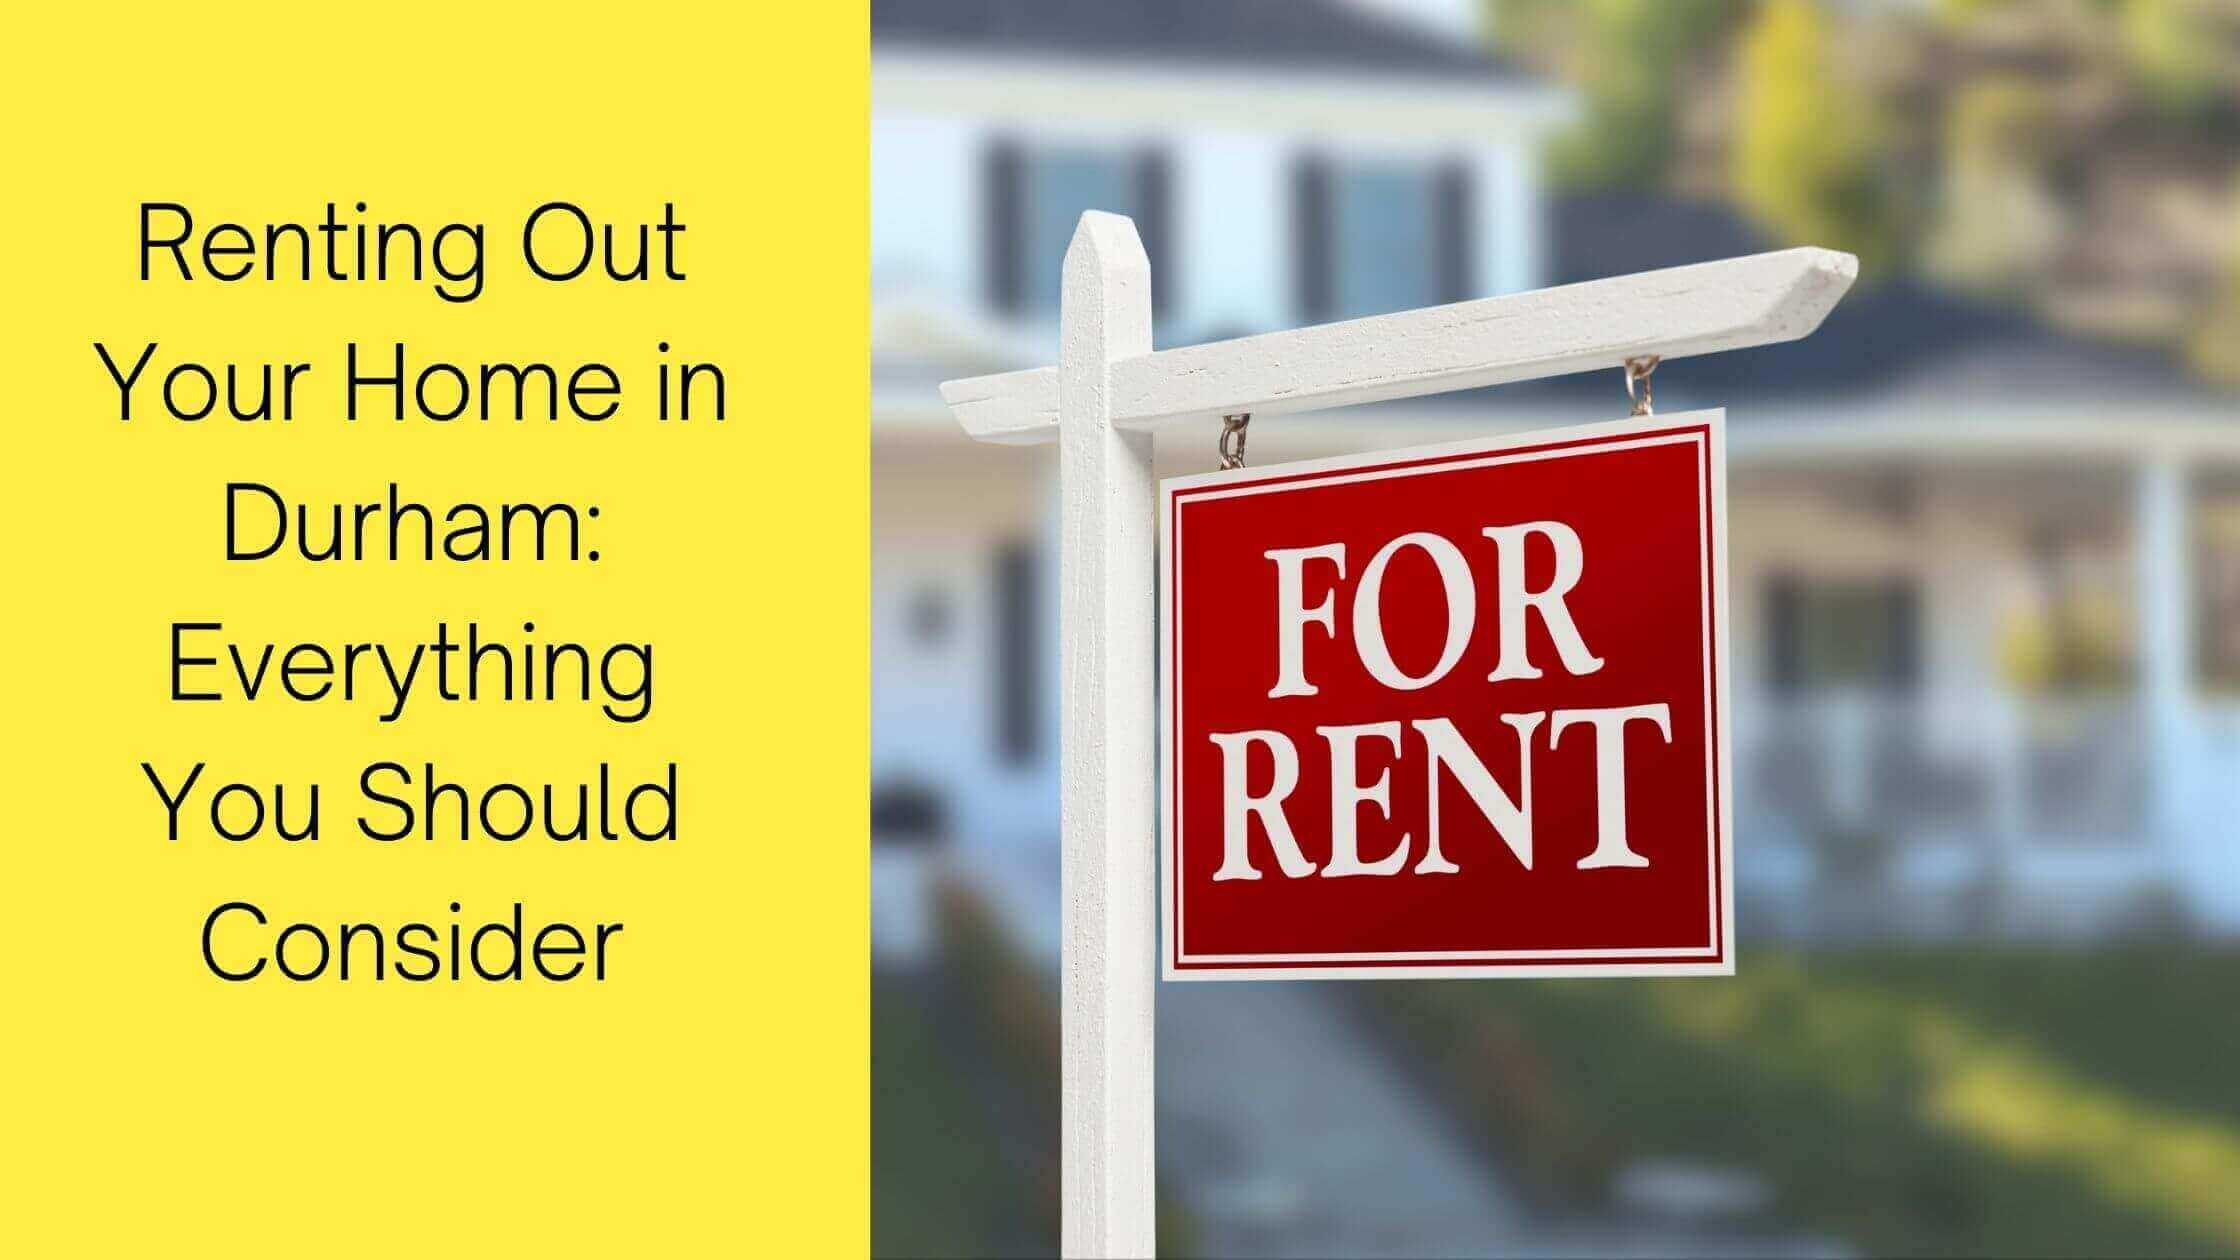 Renting Out Your Home in Durham: Everything You Should Consider